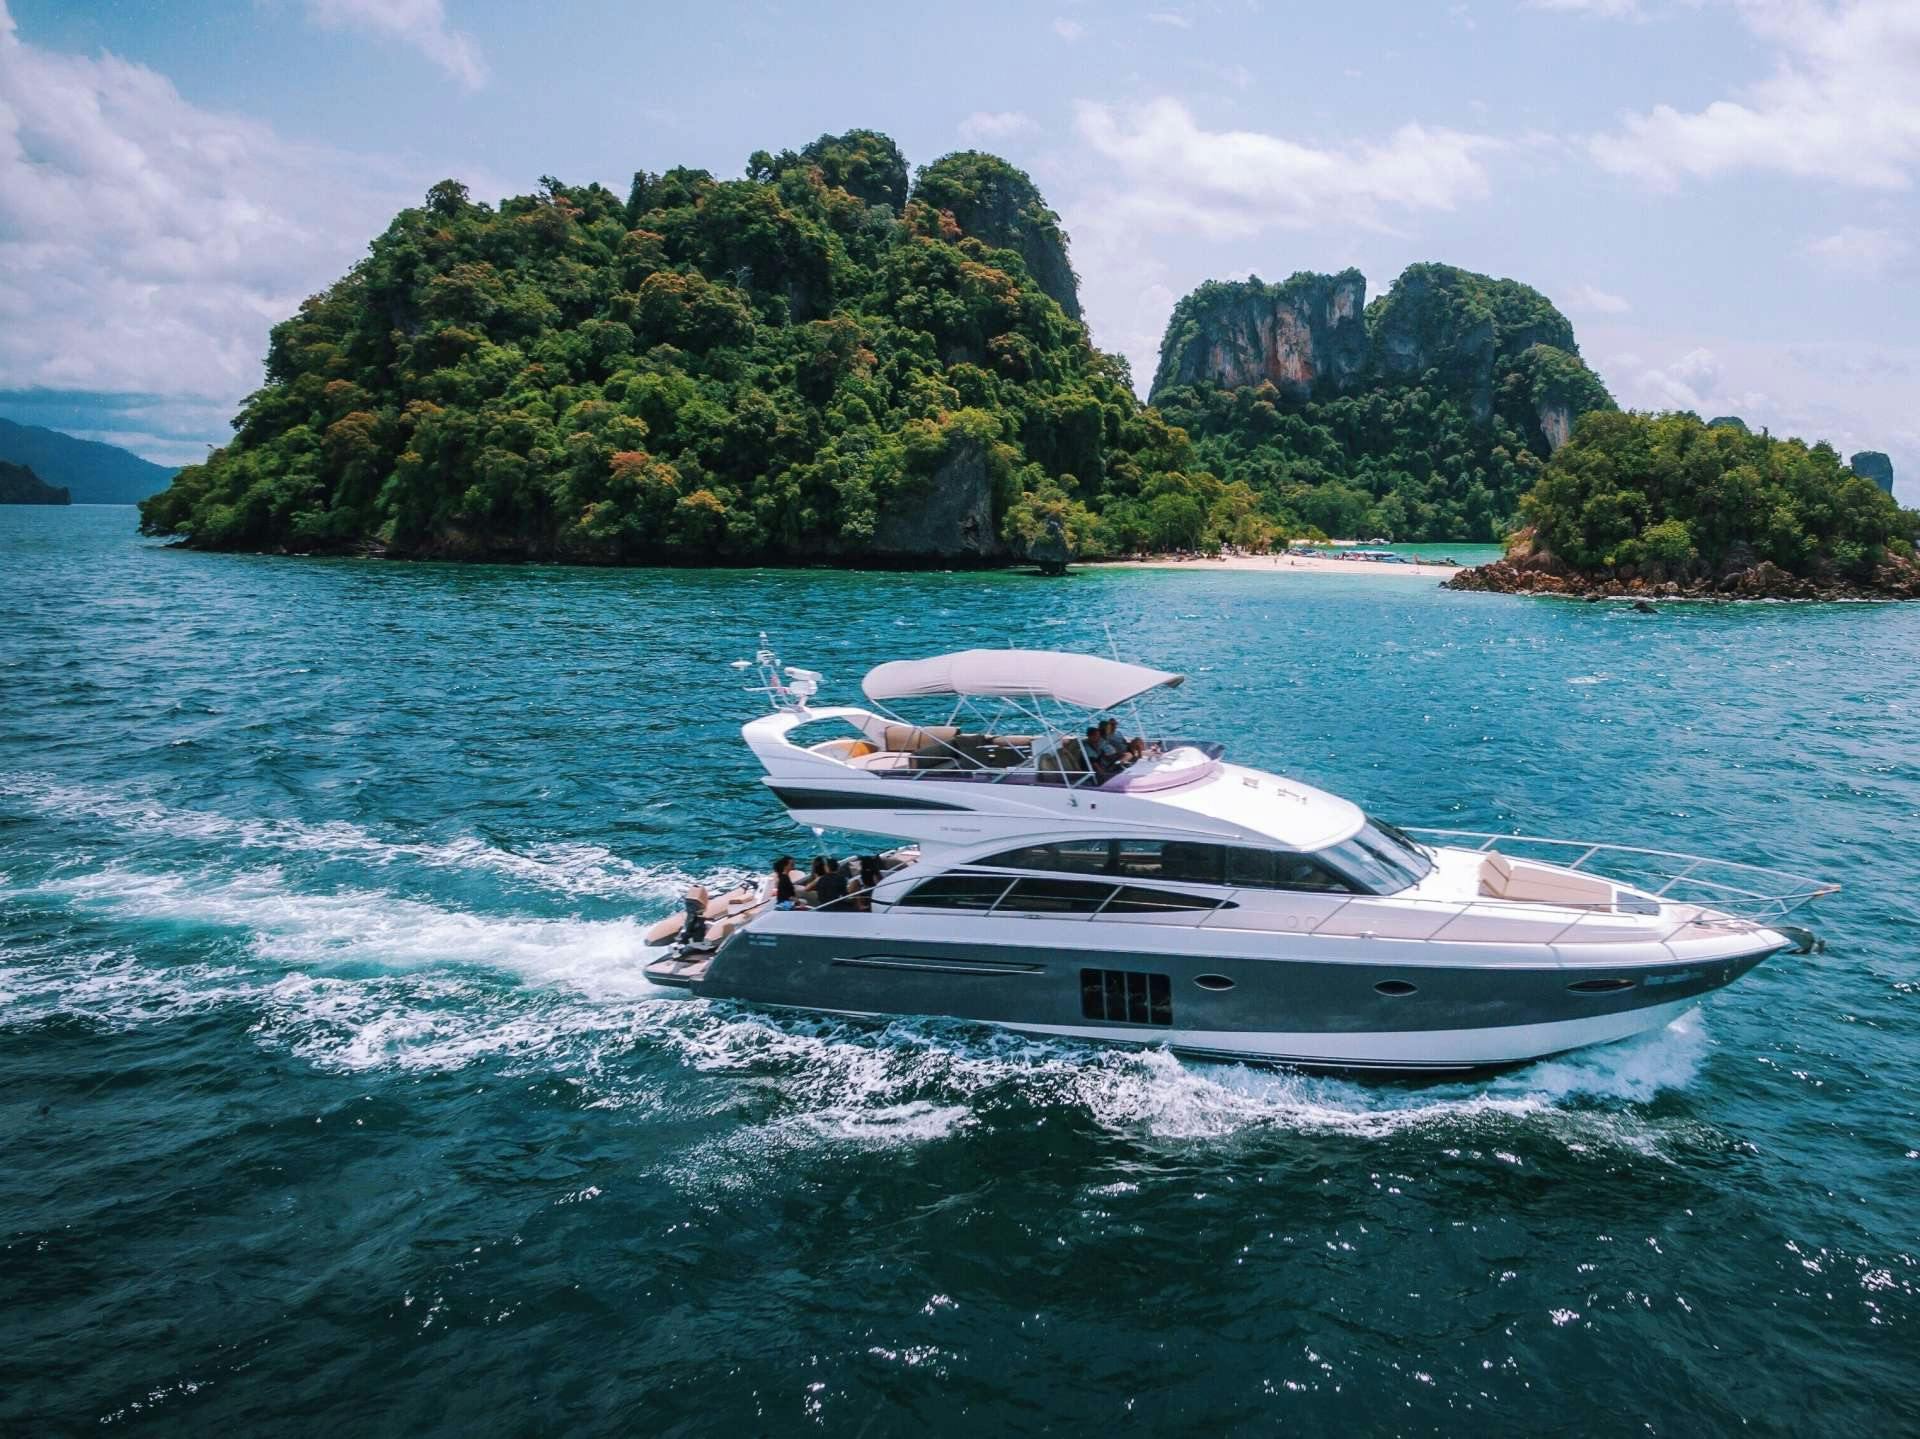 mayavee - Yacht Charter Langkawi & Boat hire in SE Asia 1